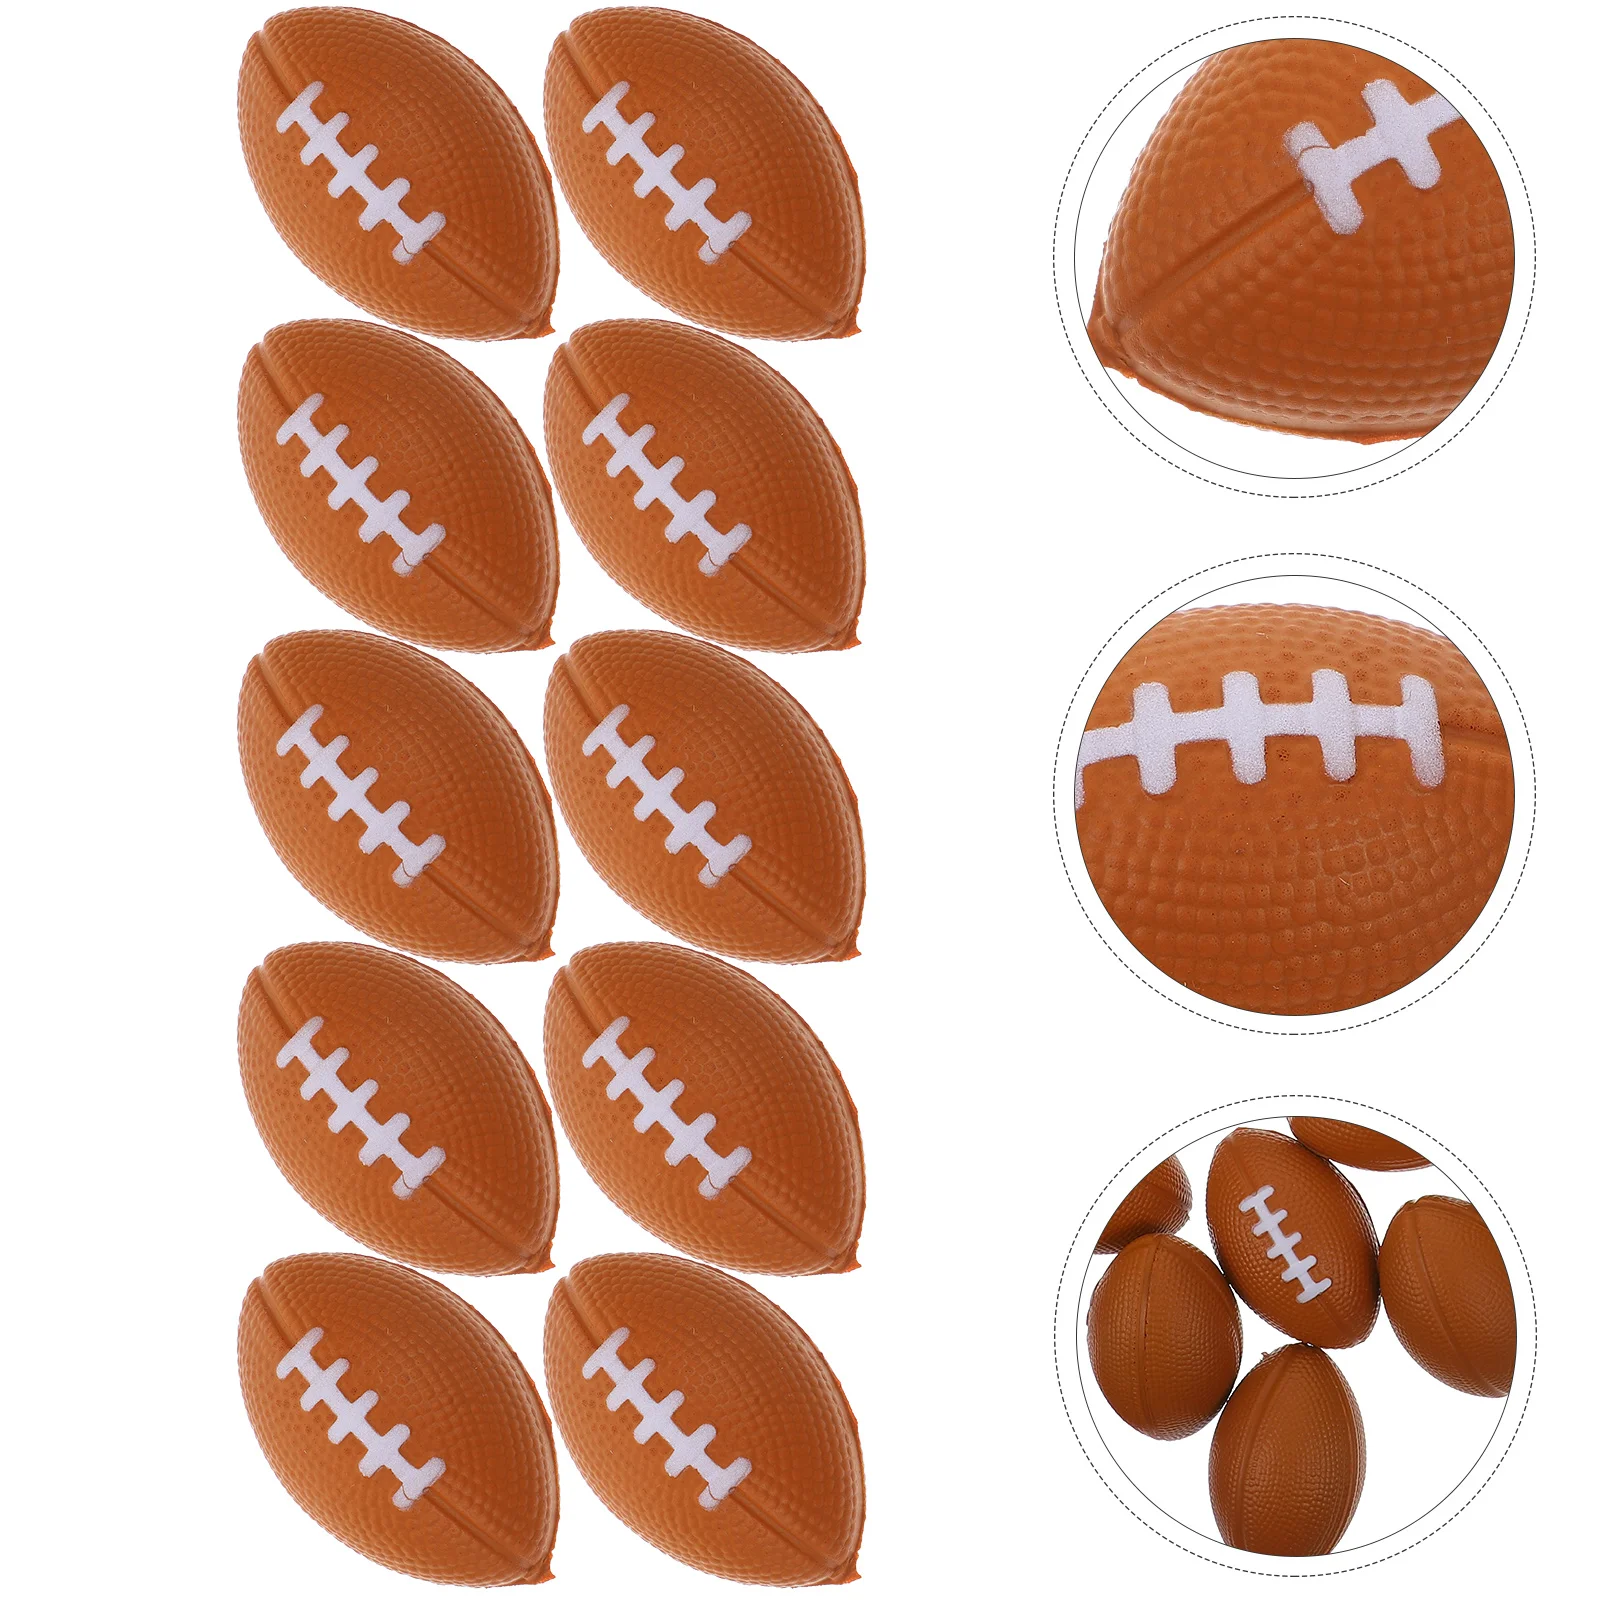 

40 Pcs Soccer Balls Fidget Plaything College Football Decorations Mini Footballs Bulk Pu Small Anxiety Relief Squeeze Toy Child